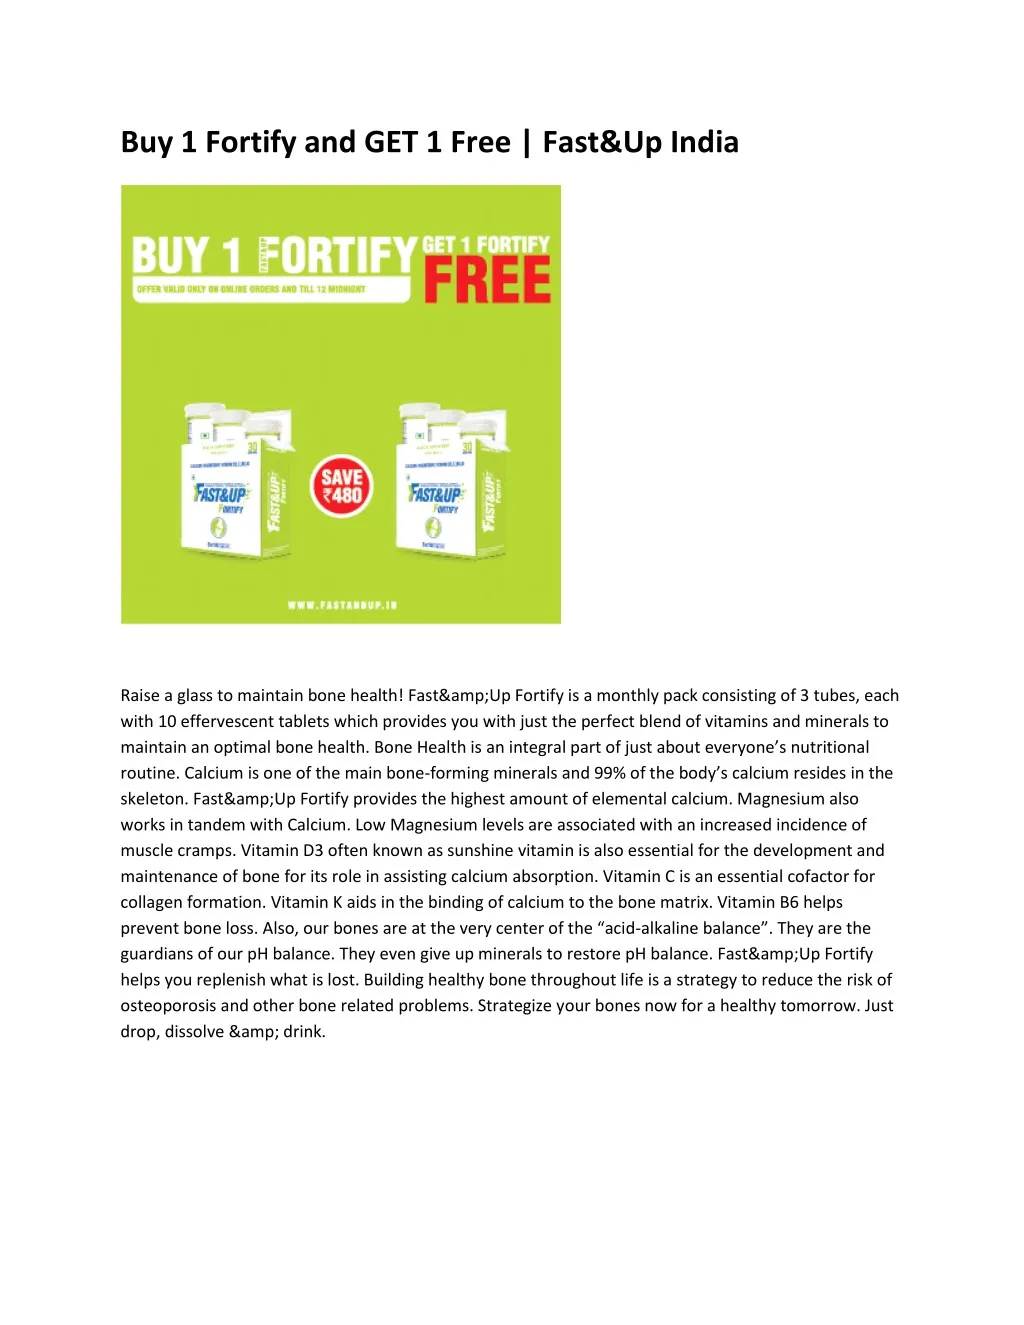 buy 1 fortify and get 1 free fast up india